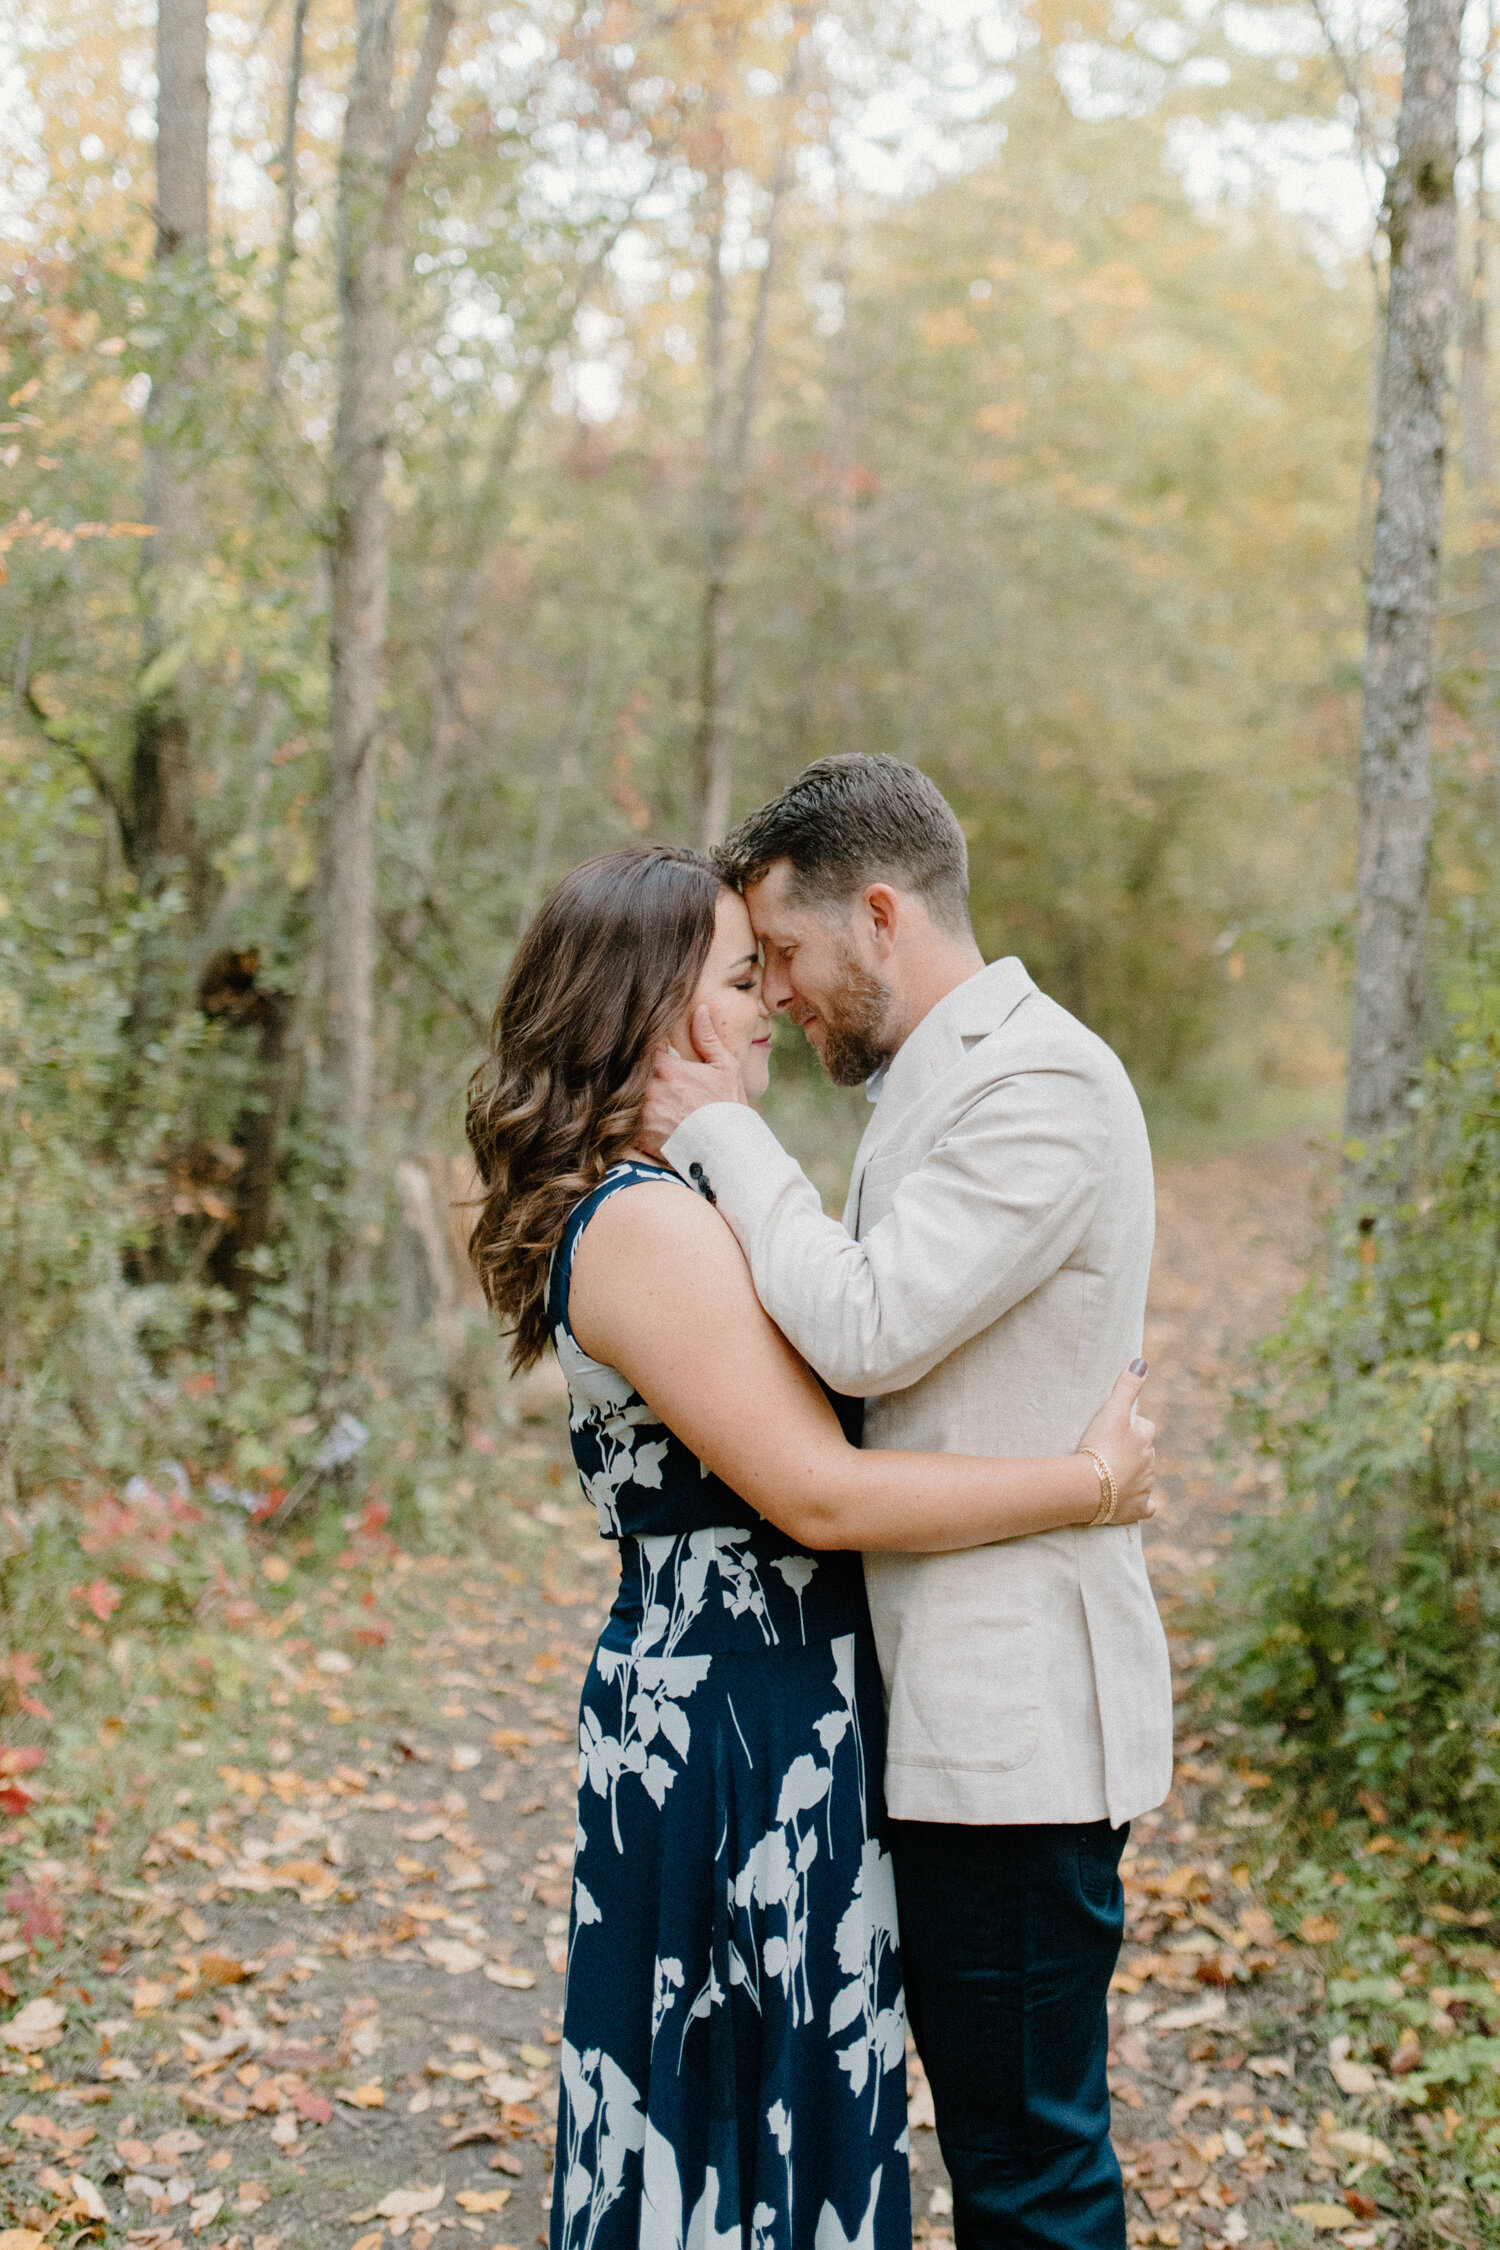  Chelsea Mason Photography captures this Ottawa, Canada couple romantically embracing and pressing foreheads together during this wooded camping engagement session. Wooded autumn engagement session, wooded dirt pathway engagement location, womens for